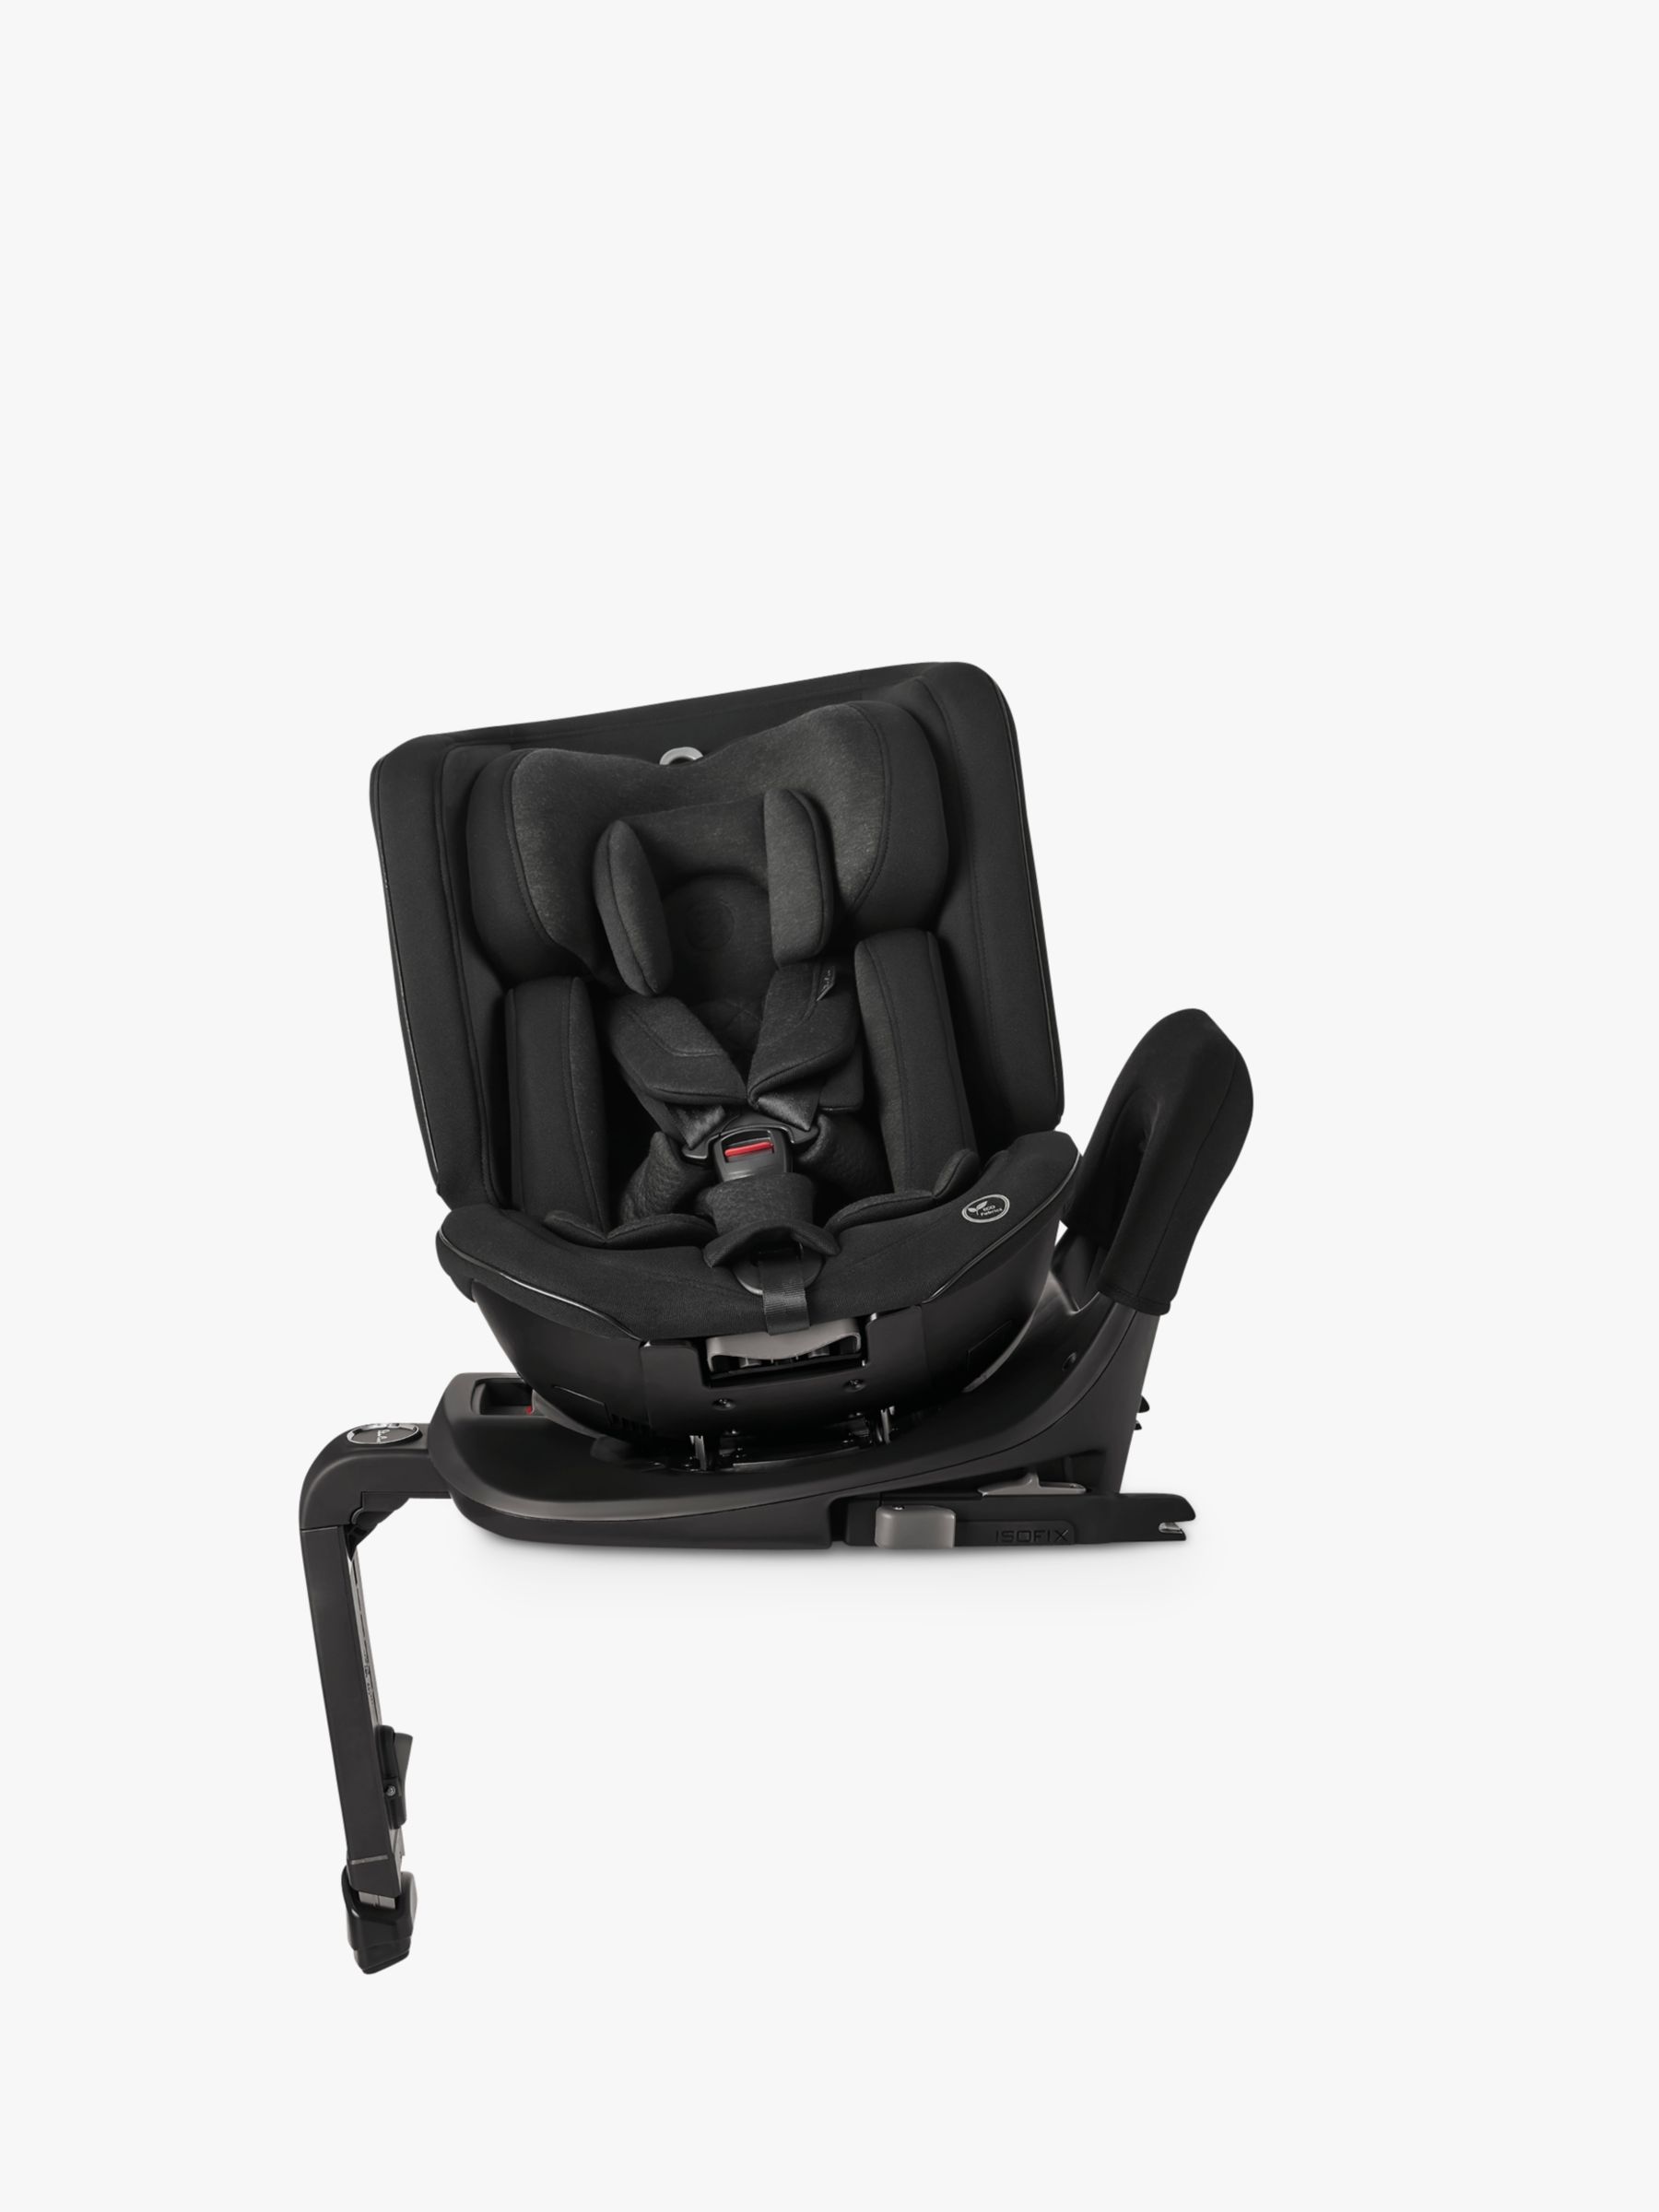 Swivel Cushion Car Seat & Chair Mobility Aid Moving Part 360